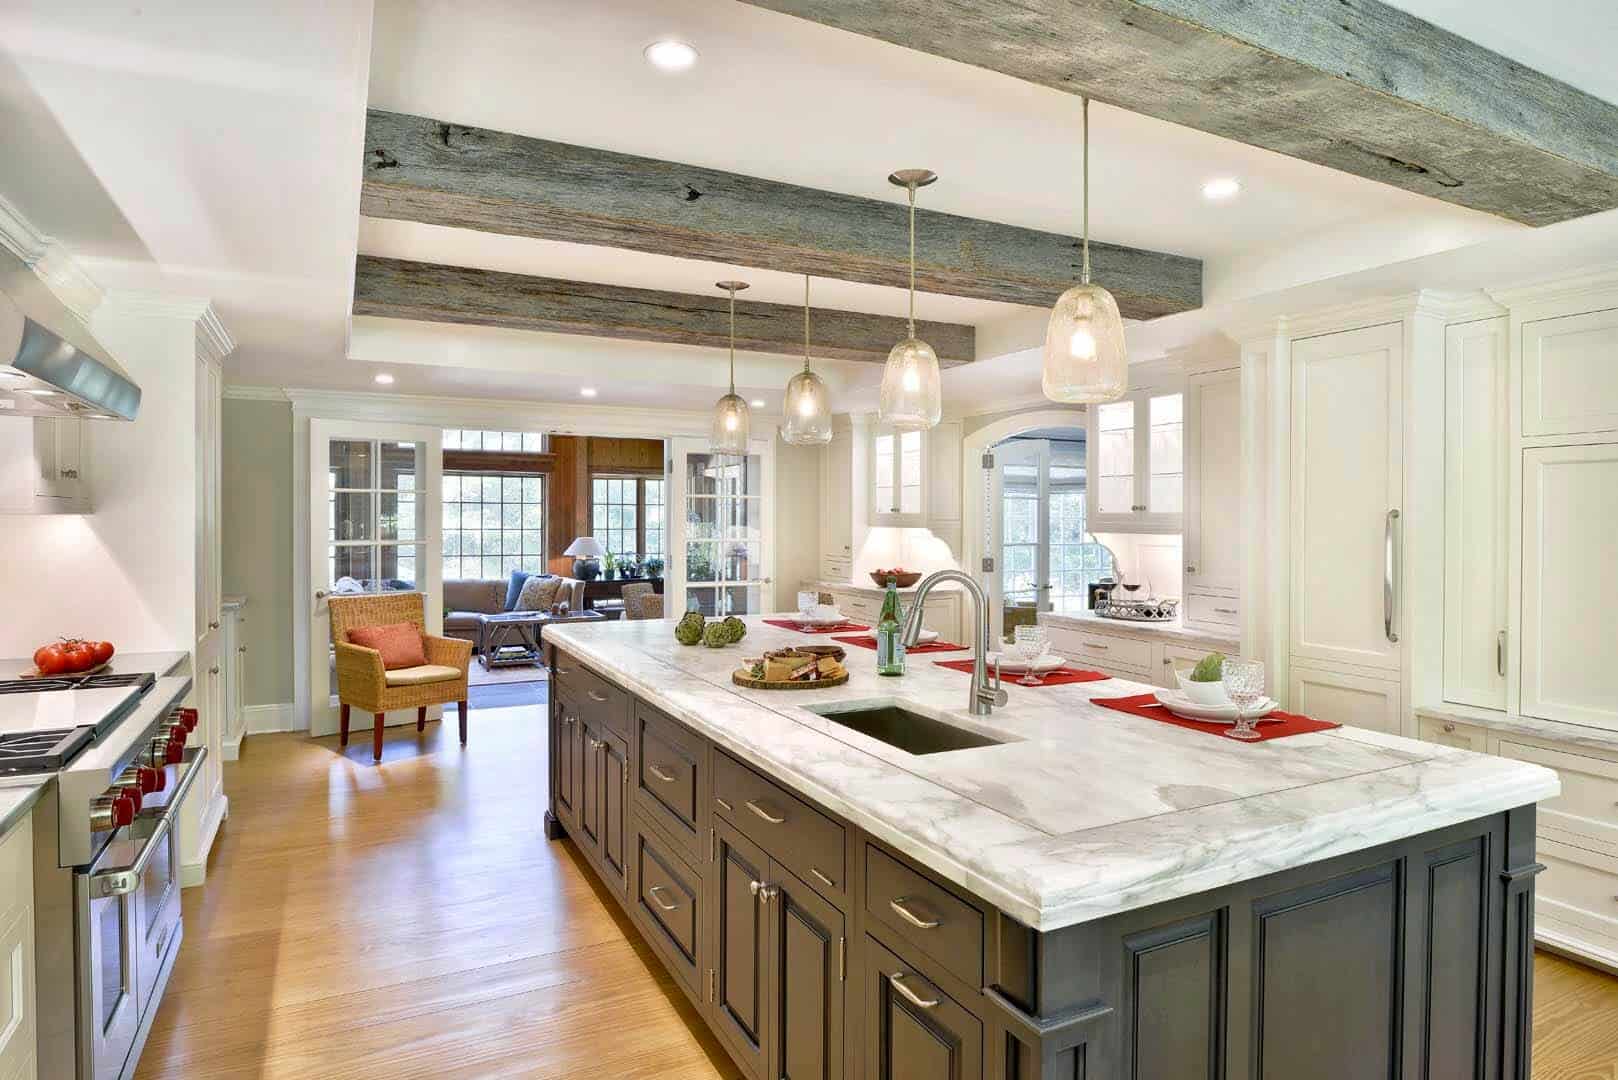 Expansive kitchen features exposed beams, white Bilotta cabinetry and large grey island with marble top.